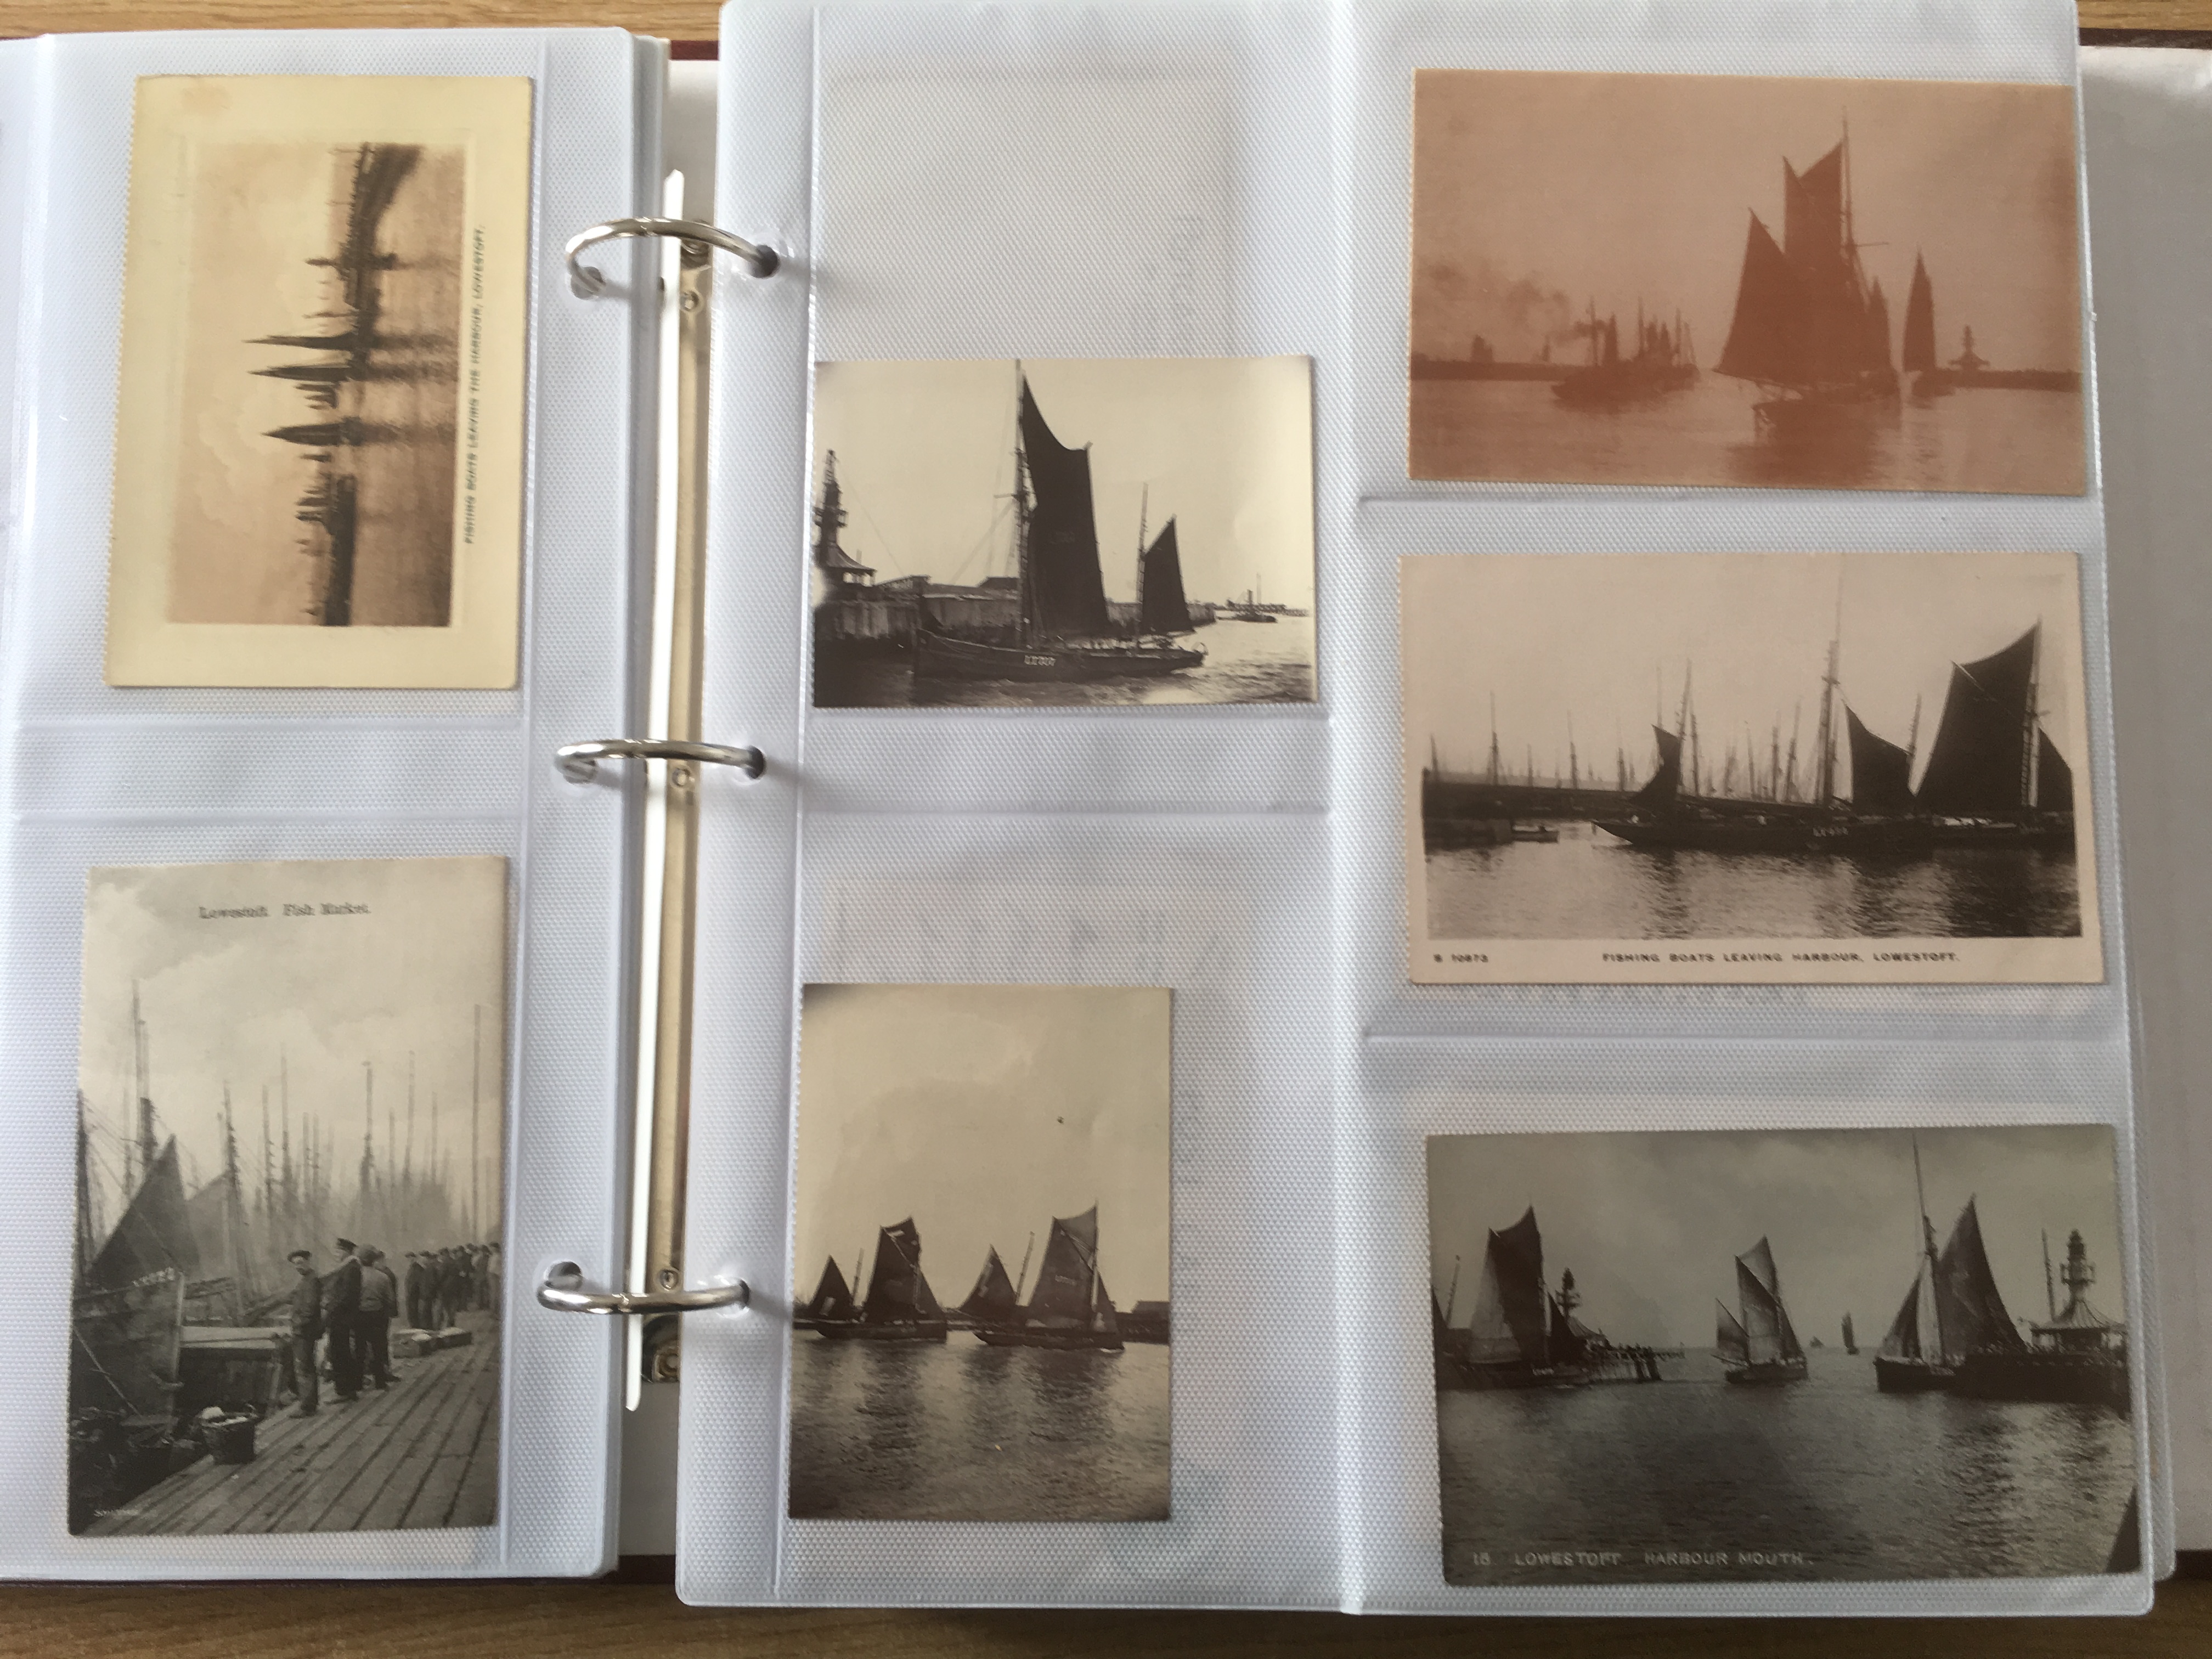 SUFFOLK: ALBUM WITH A COLLECTION OF LOWESTOFT FISHING INDUSTRY POSTCARDS AND A FEW PHOTOS. - Image 7 of 8